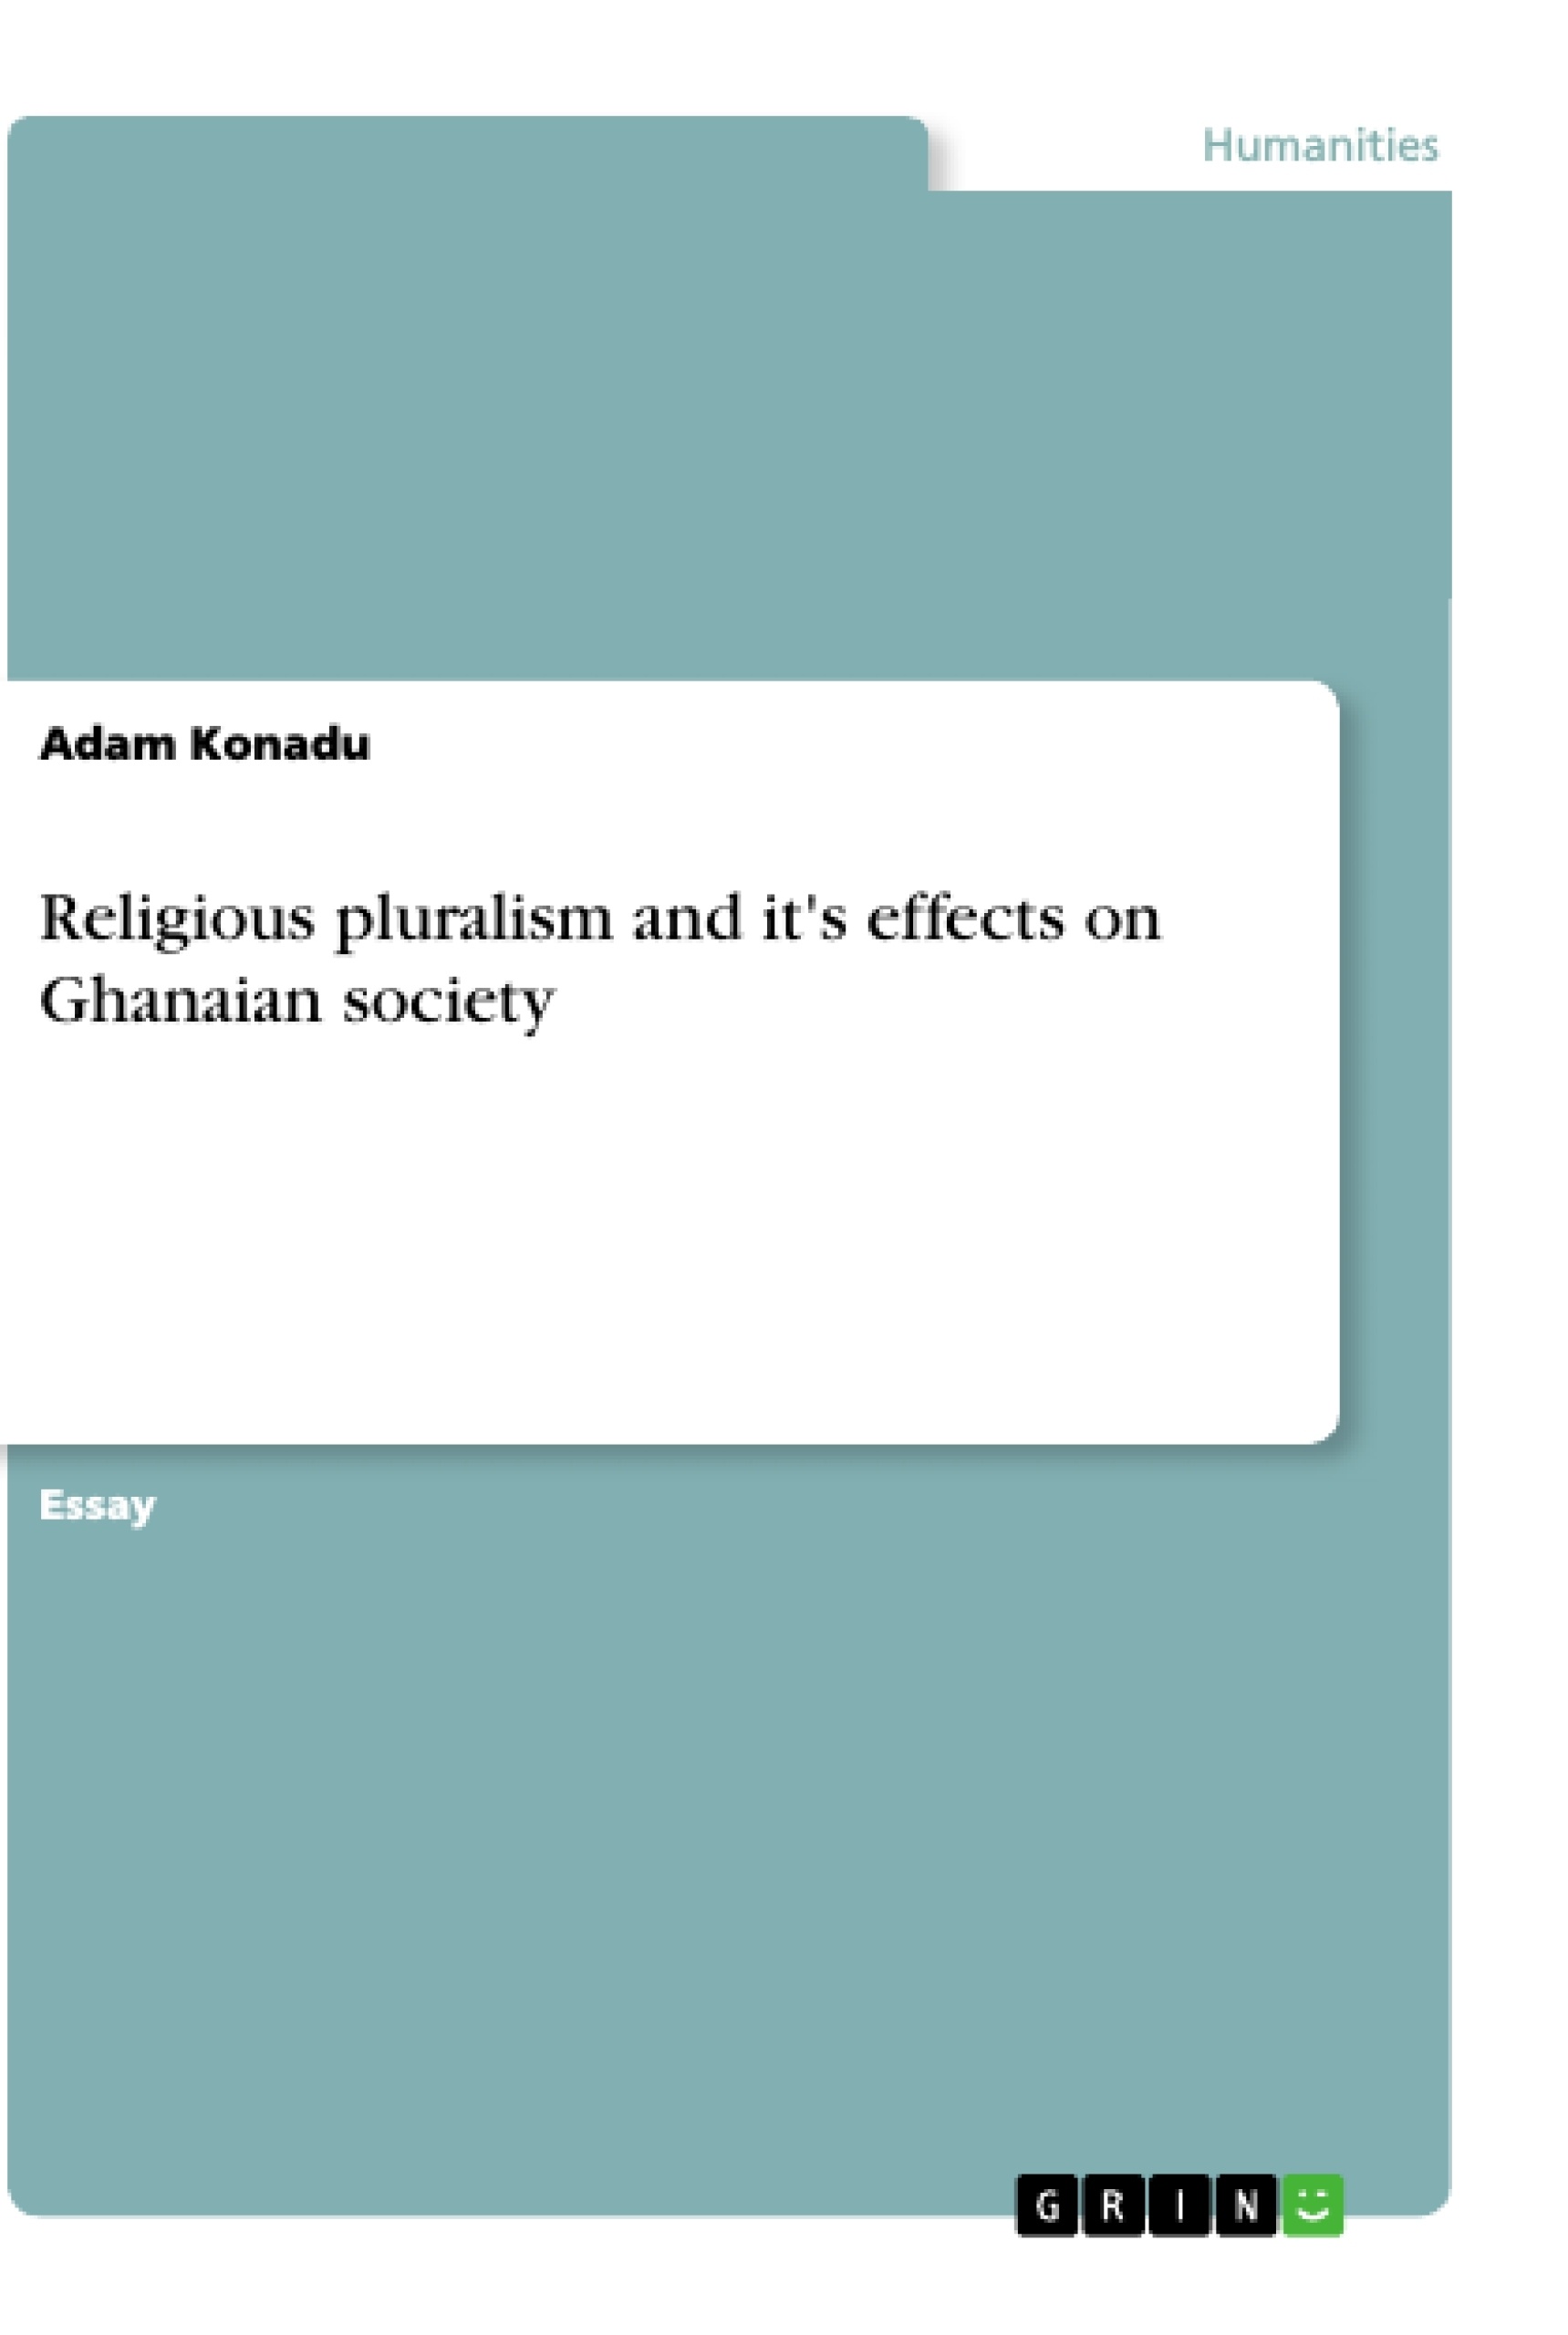 Titre: Religious pluralism and it's effects on Ghanaian society